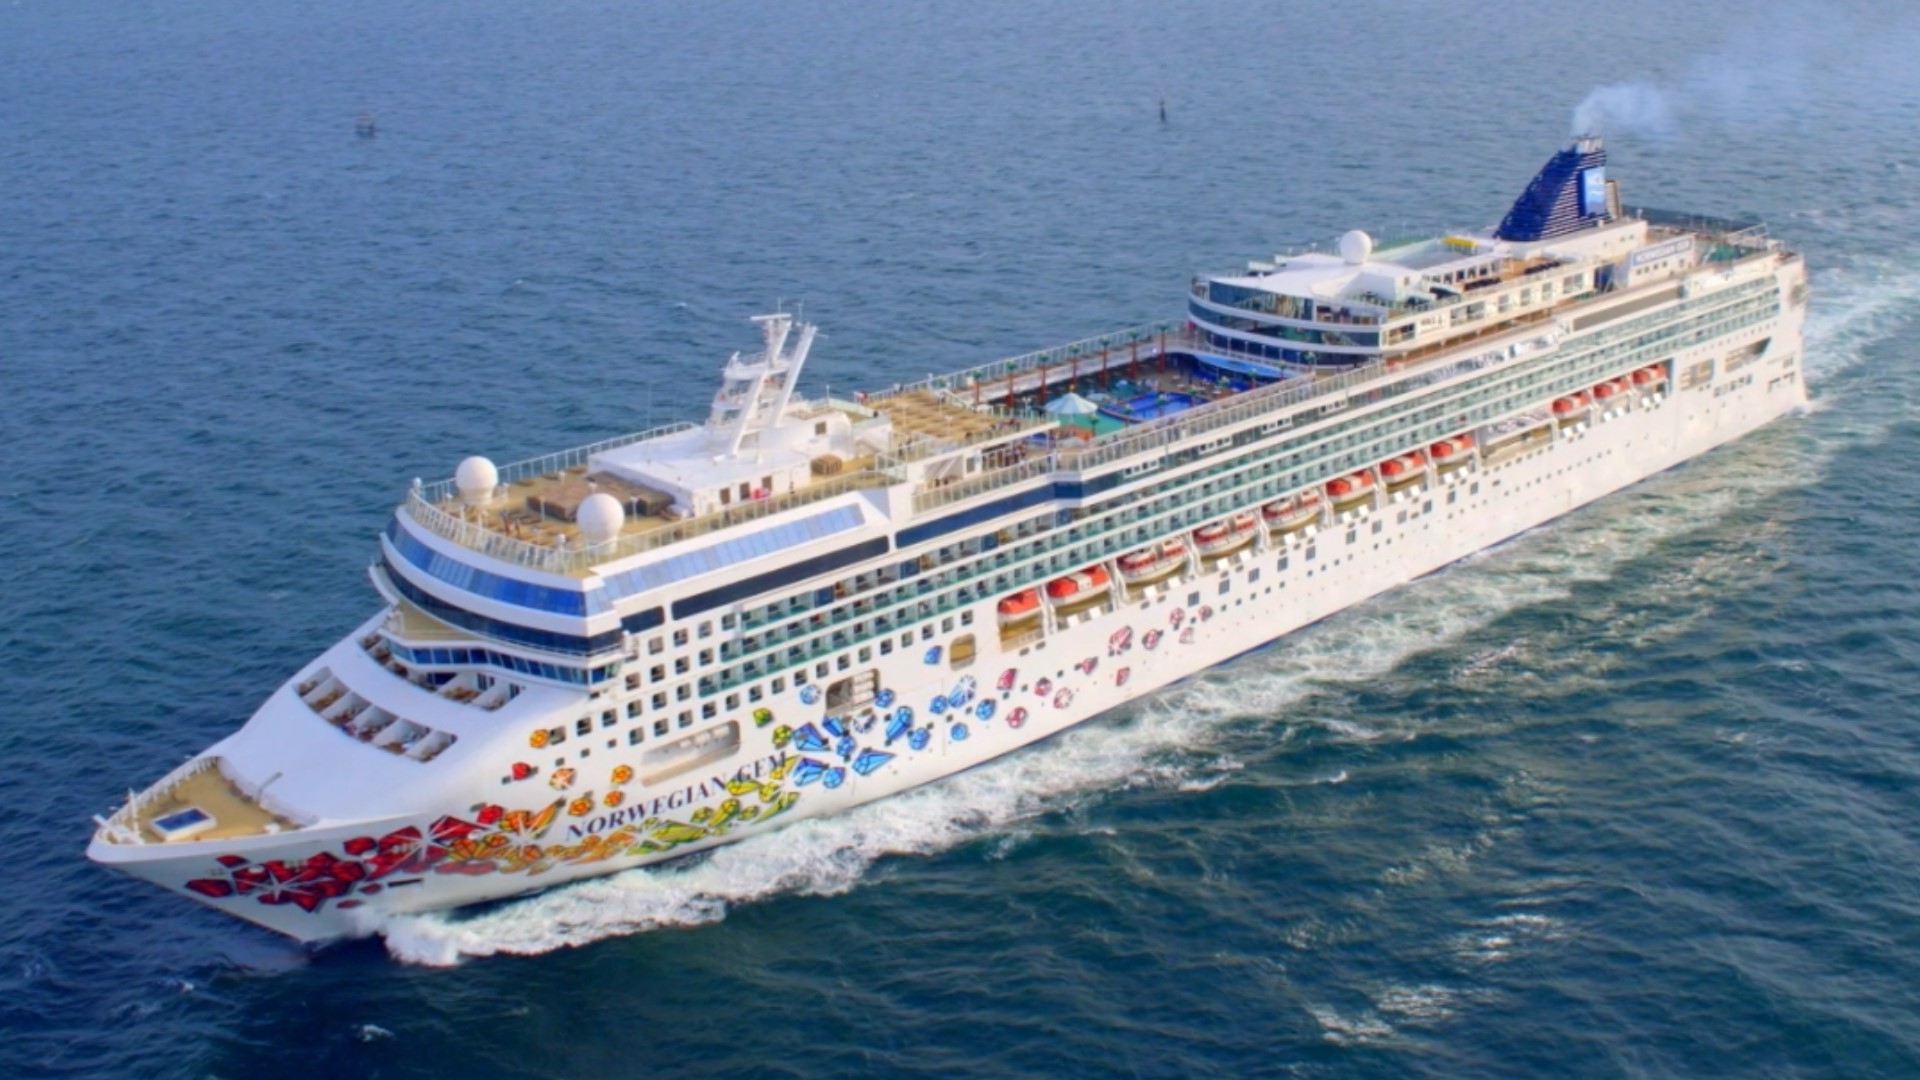 Norwegian Cruise Line will bring the recently refurbished ship to the JAXPORT Cruise Terminal as another option for travelers departing from the River City.